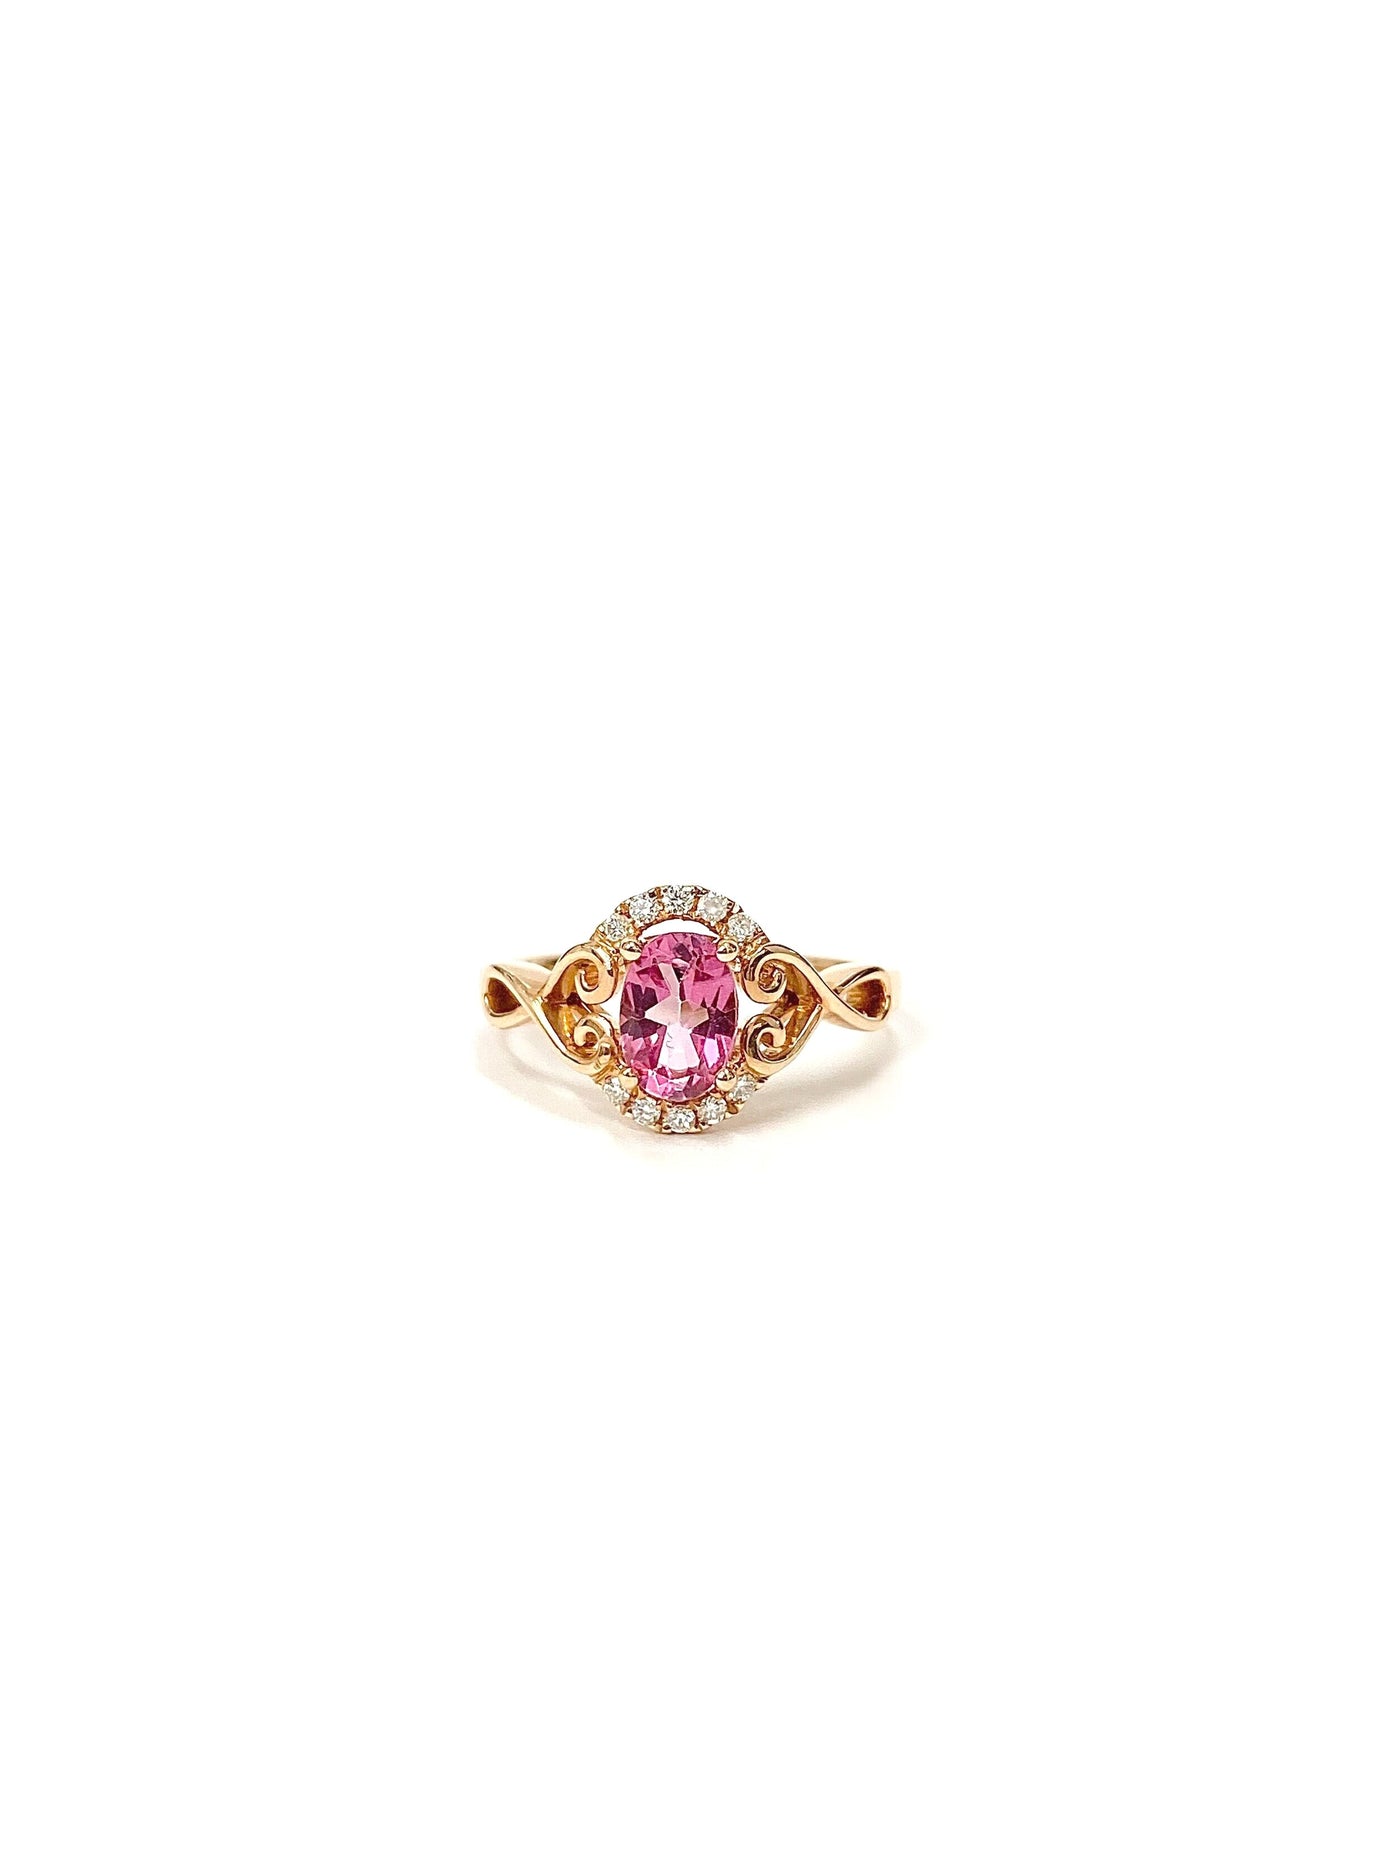 14 Karat Rose Gold Pink Topaz and Diamond Ring with Heart Accents